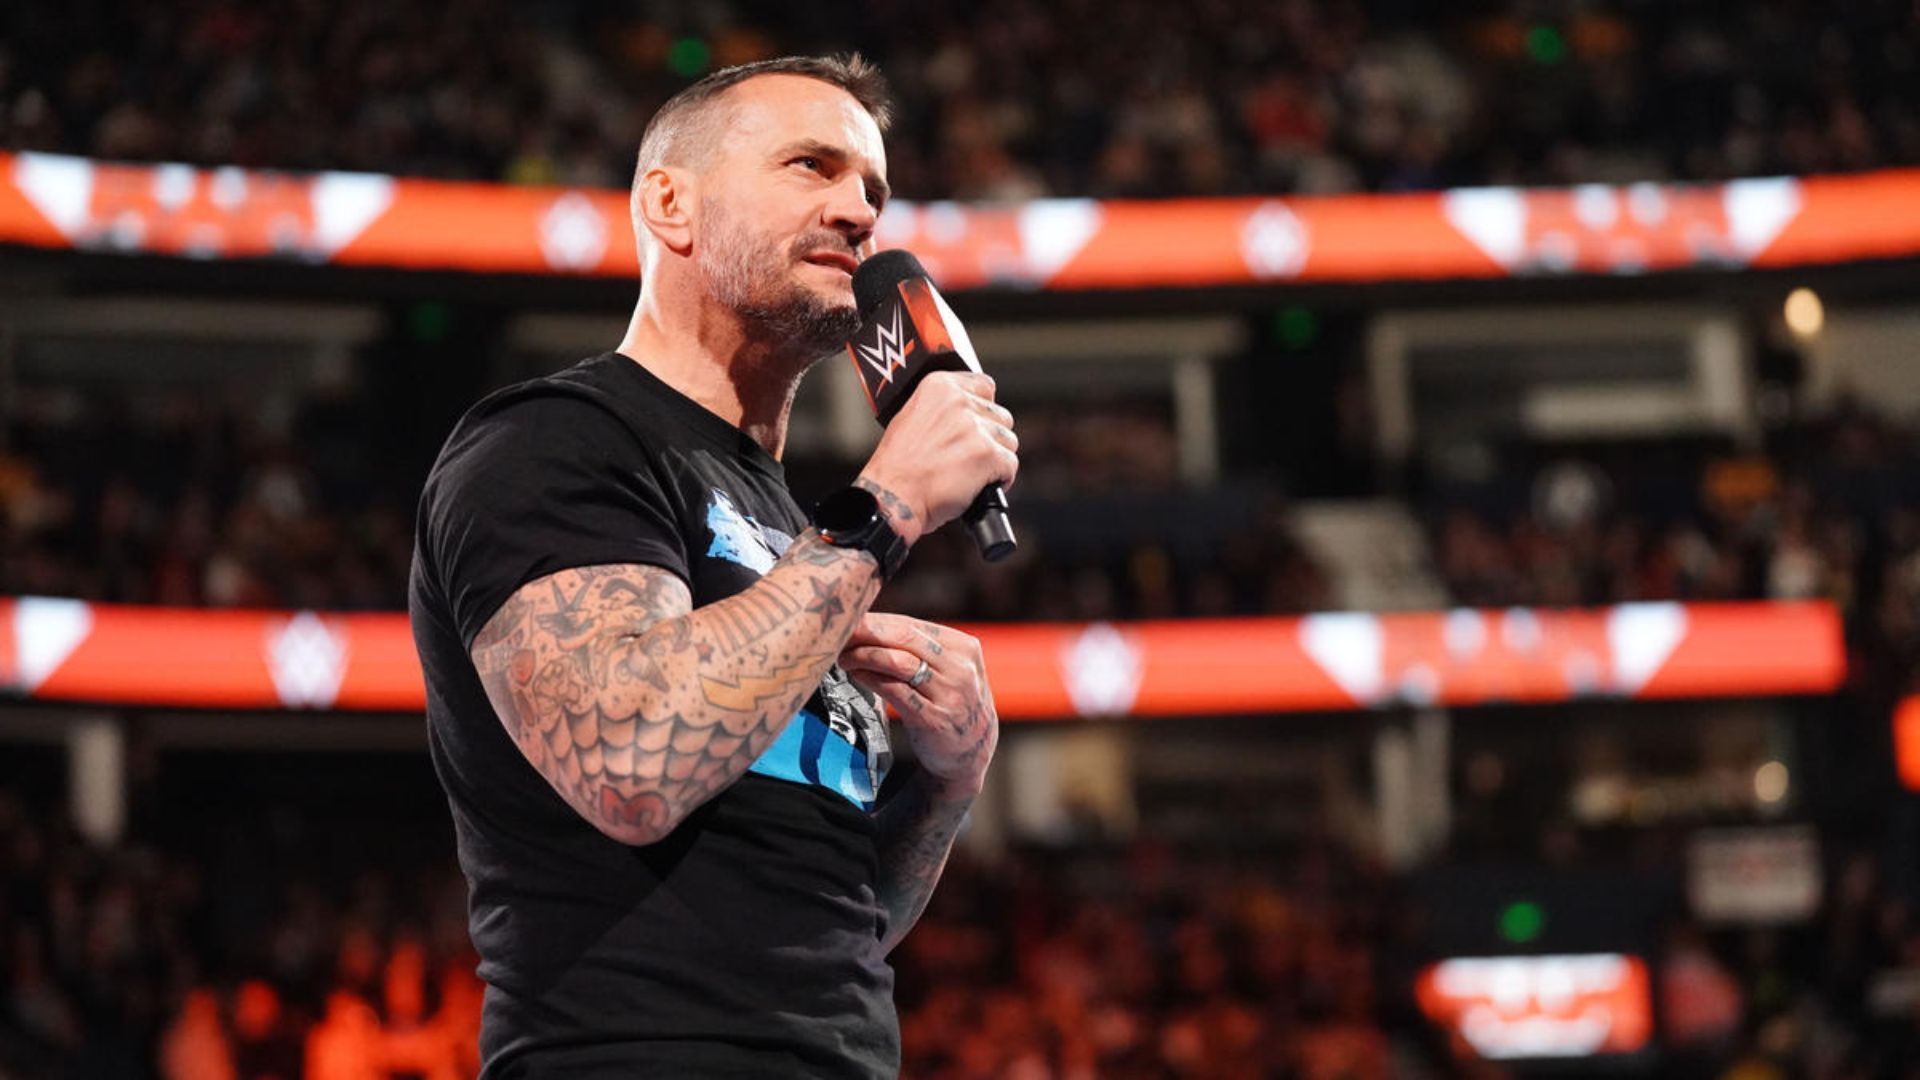 CM Punk delivered his first WWE promo in nearly a decade!